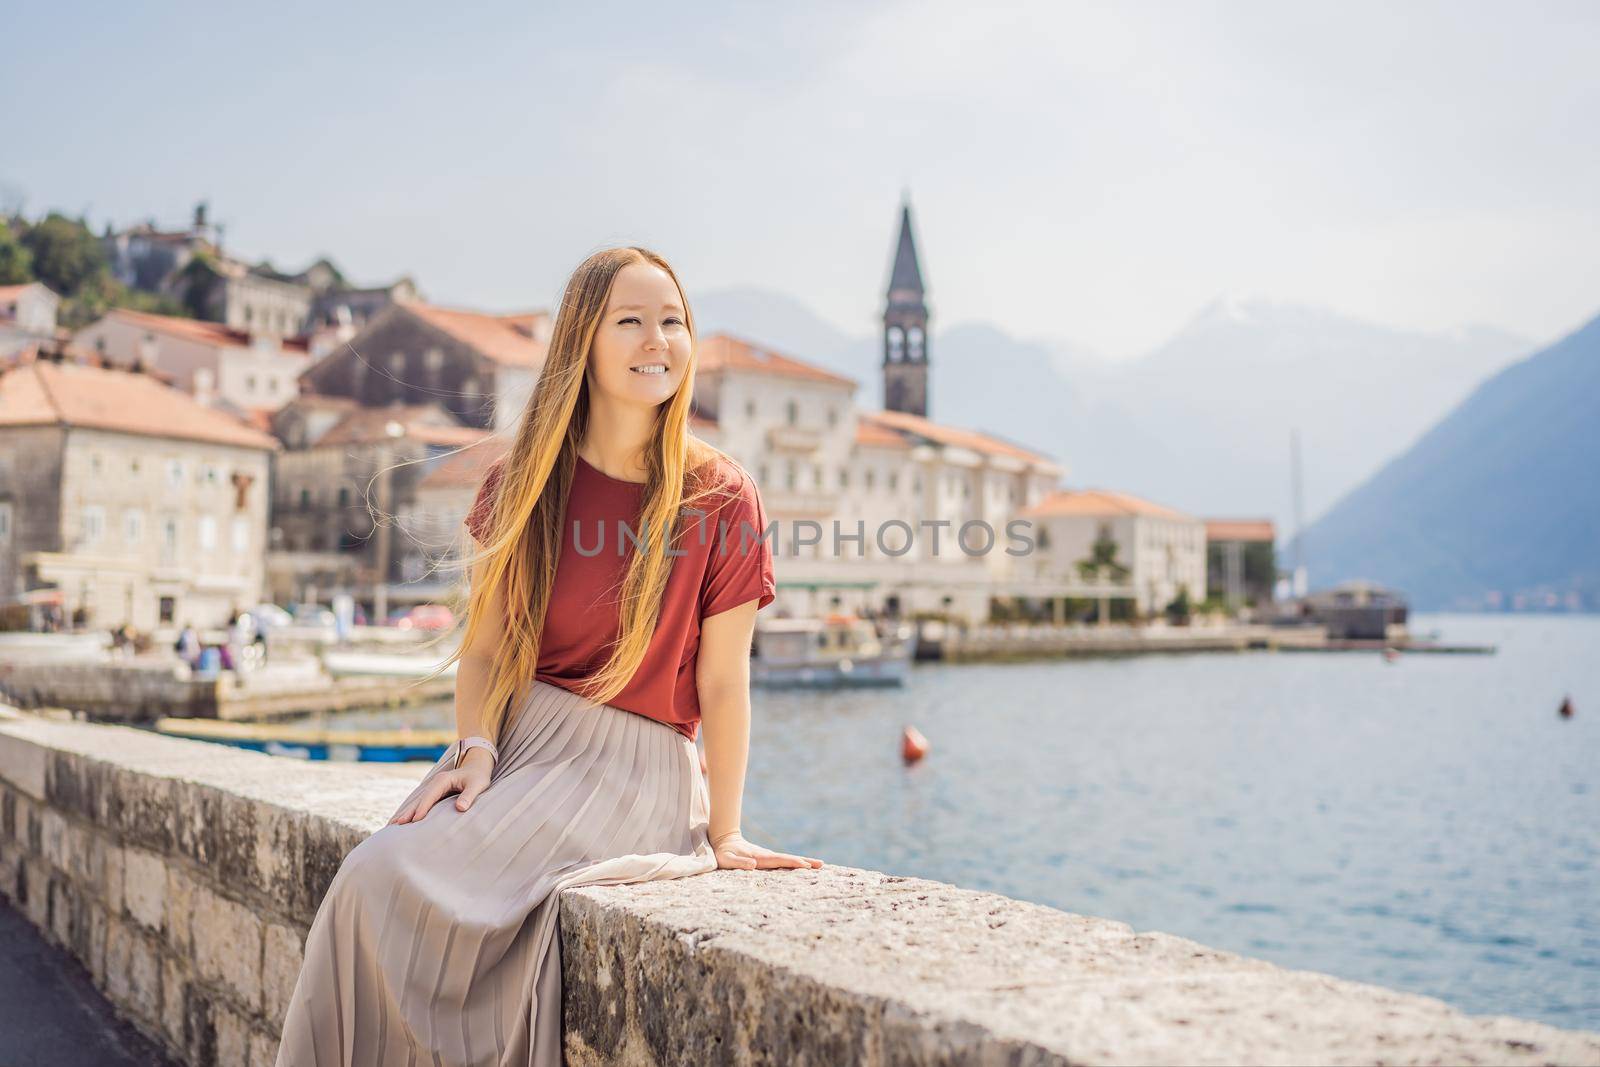 Woman tourist enjoying Colorful street in Old town of Perast on a sunny day, Montenegro. Travel to Montenegro concept. Scenic panorama view of the historic town of Perast at famous Bay of Kotor on a beautiful sunny day with blue sky and clouds in summer, Montenegro, southern Europe.